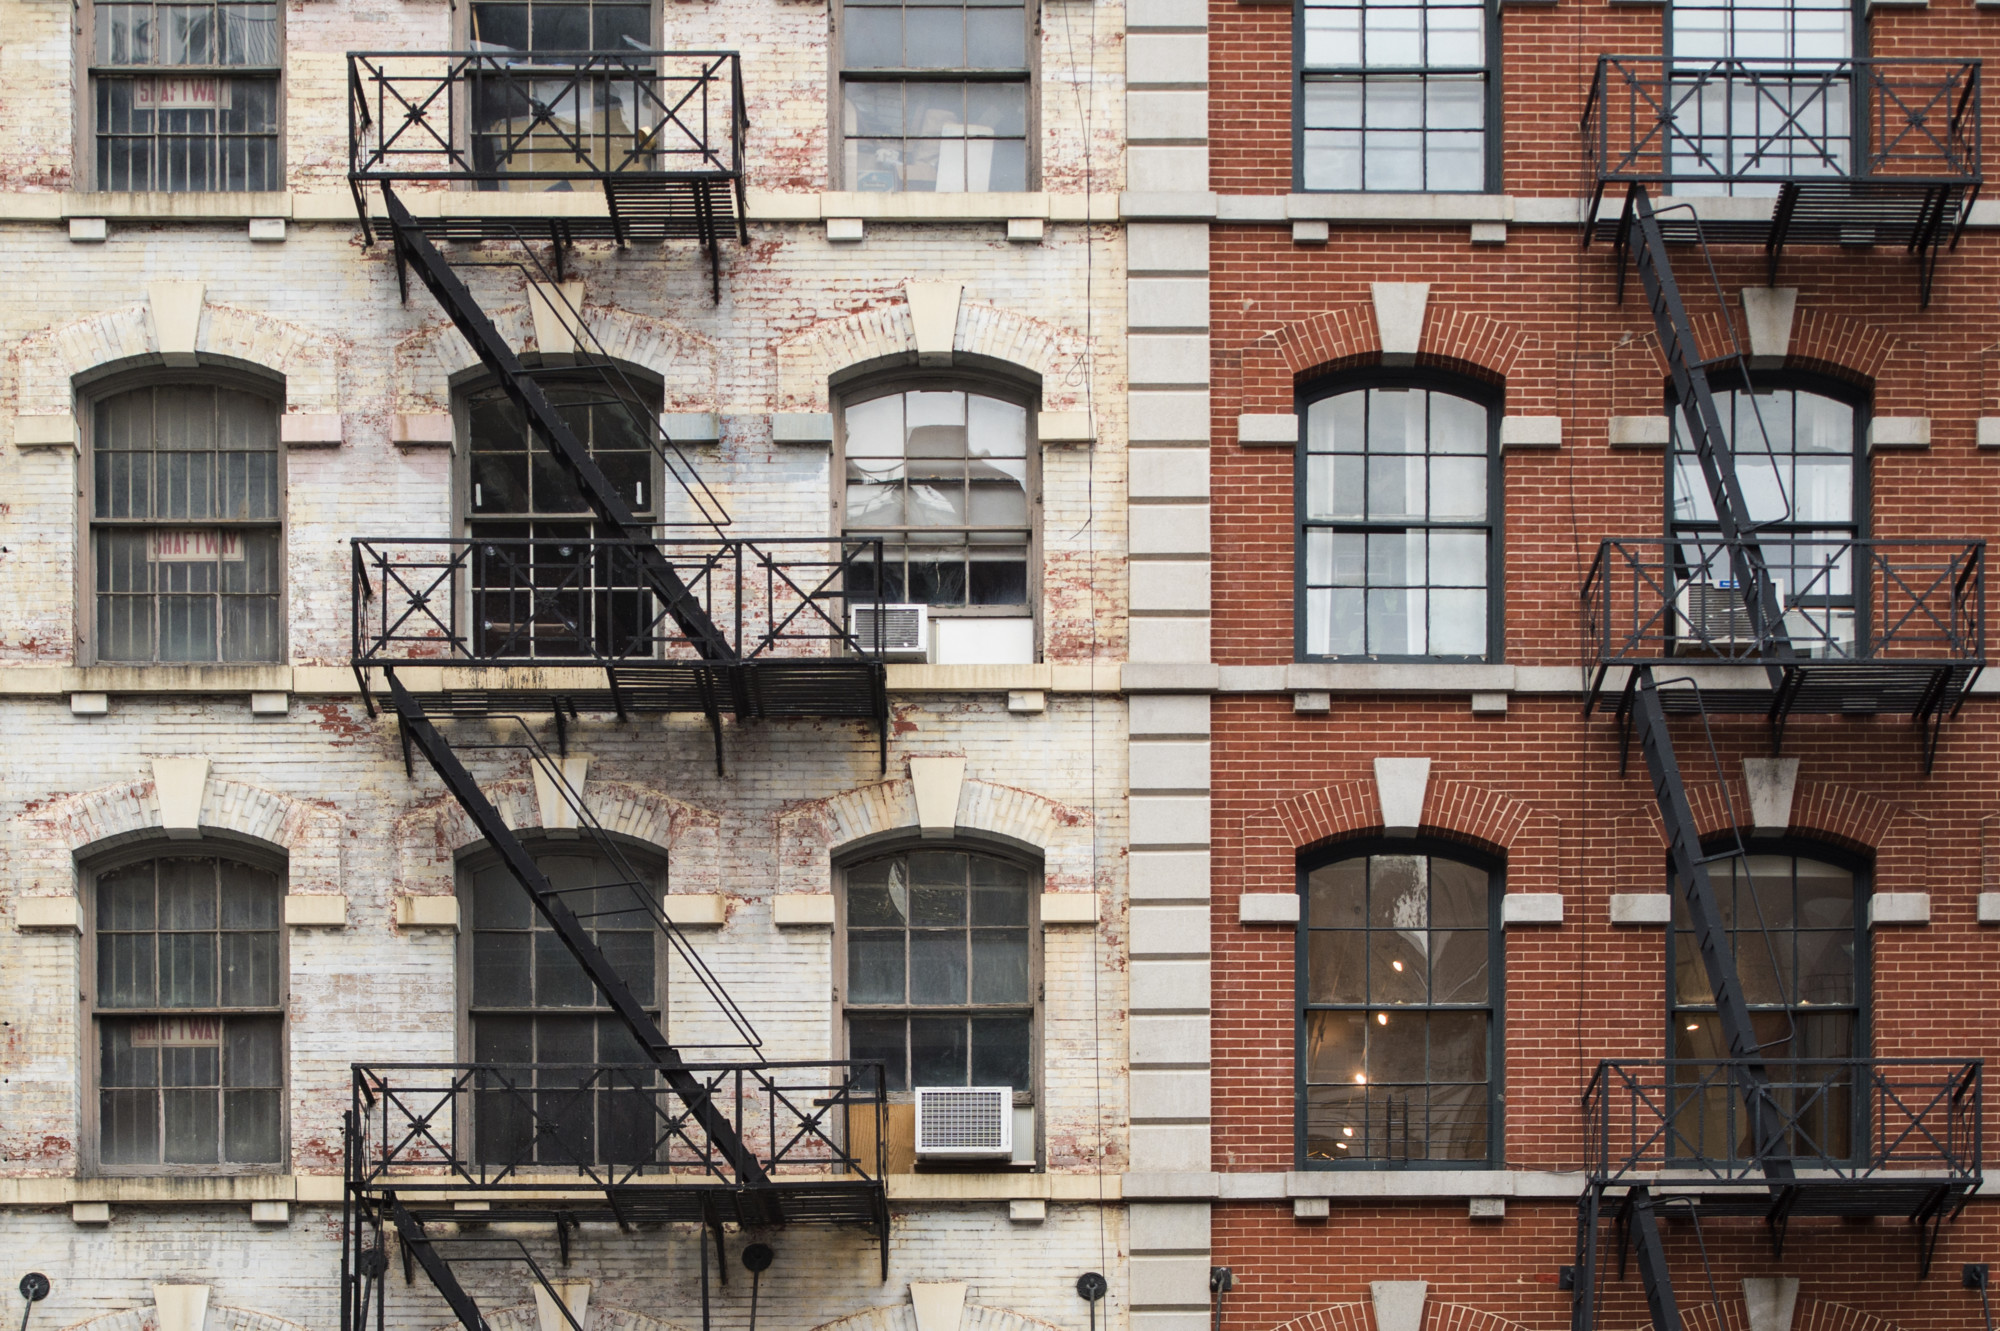 Rent-Stabilized vs. Controlled Apartments